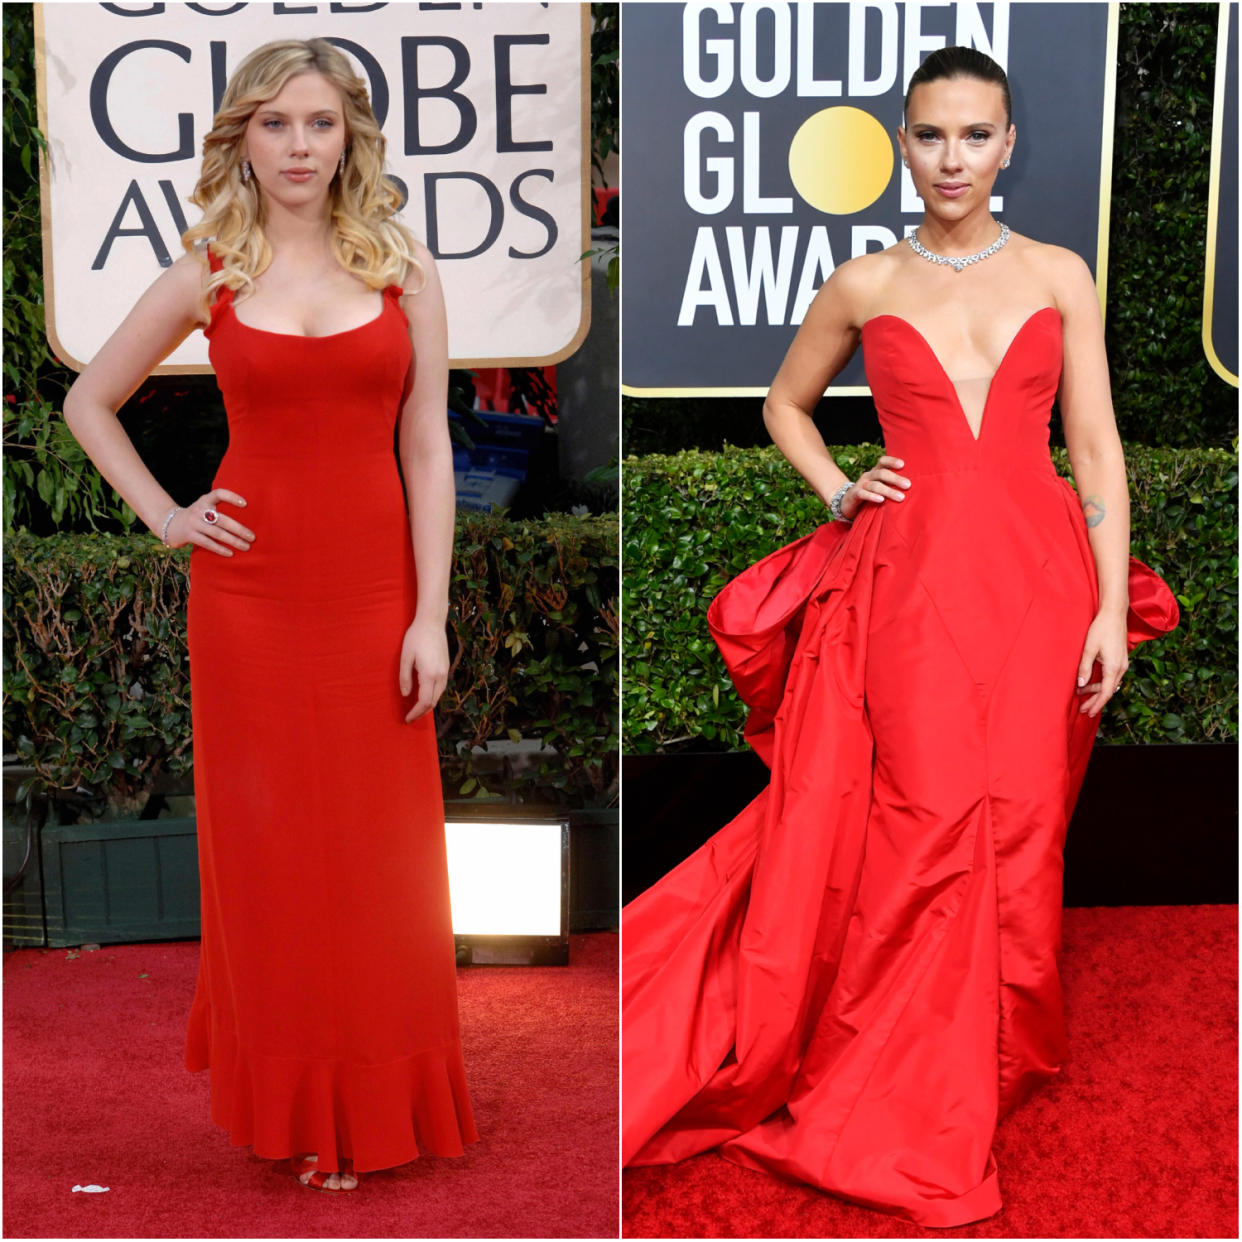 A composite image of Scarlett Johansson wearing red dresses to both the 2006 and 2020 Golden Globes. (Getty Images)